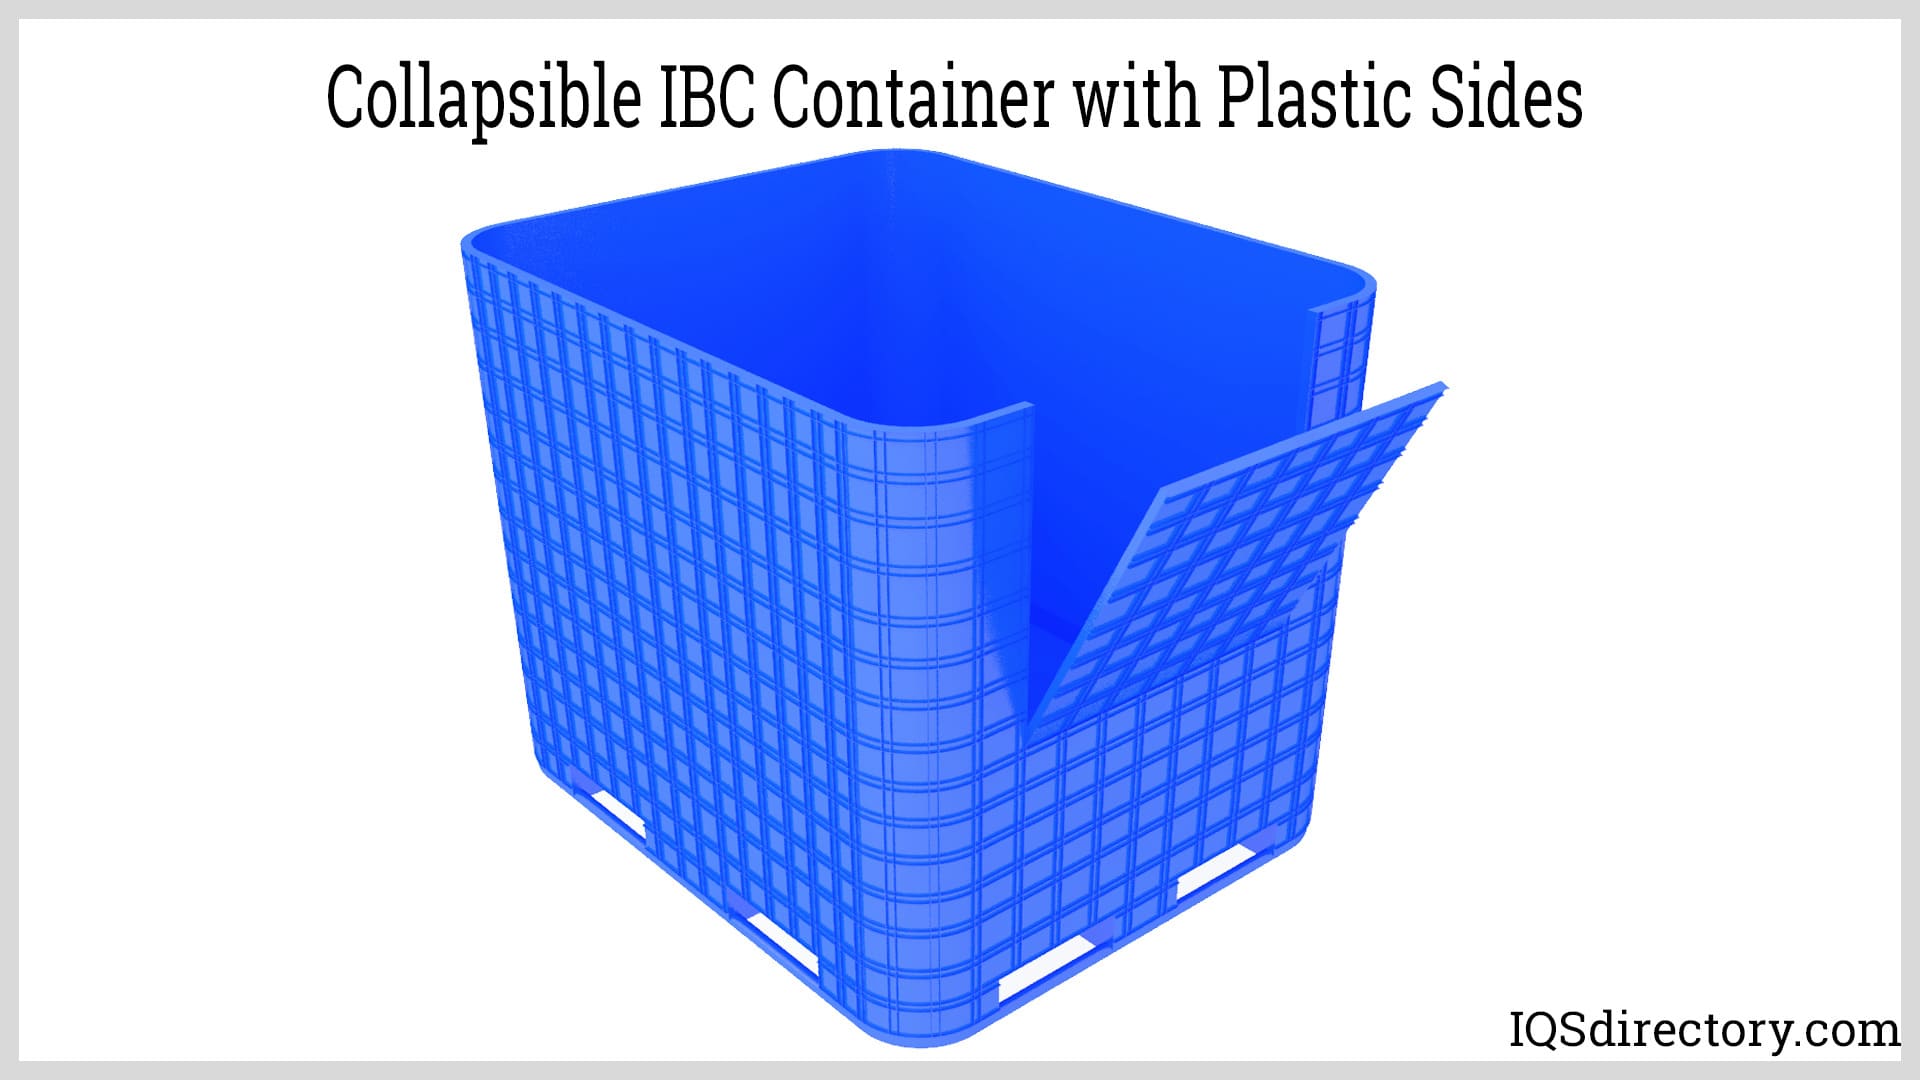 Collapsible IBC Container with Plastic Sides